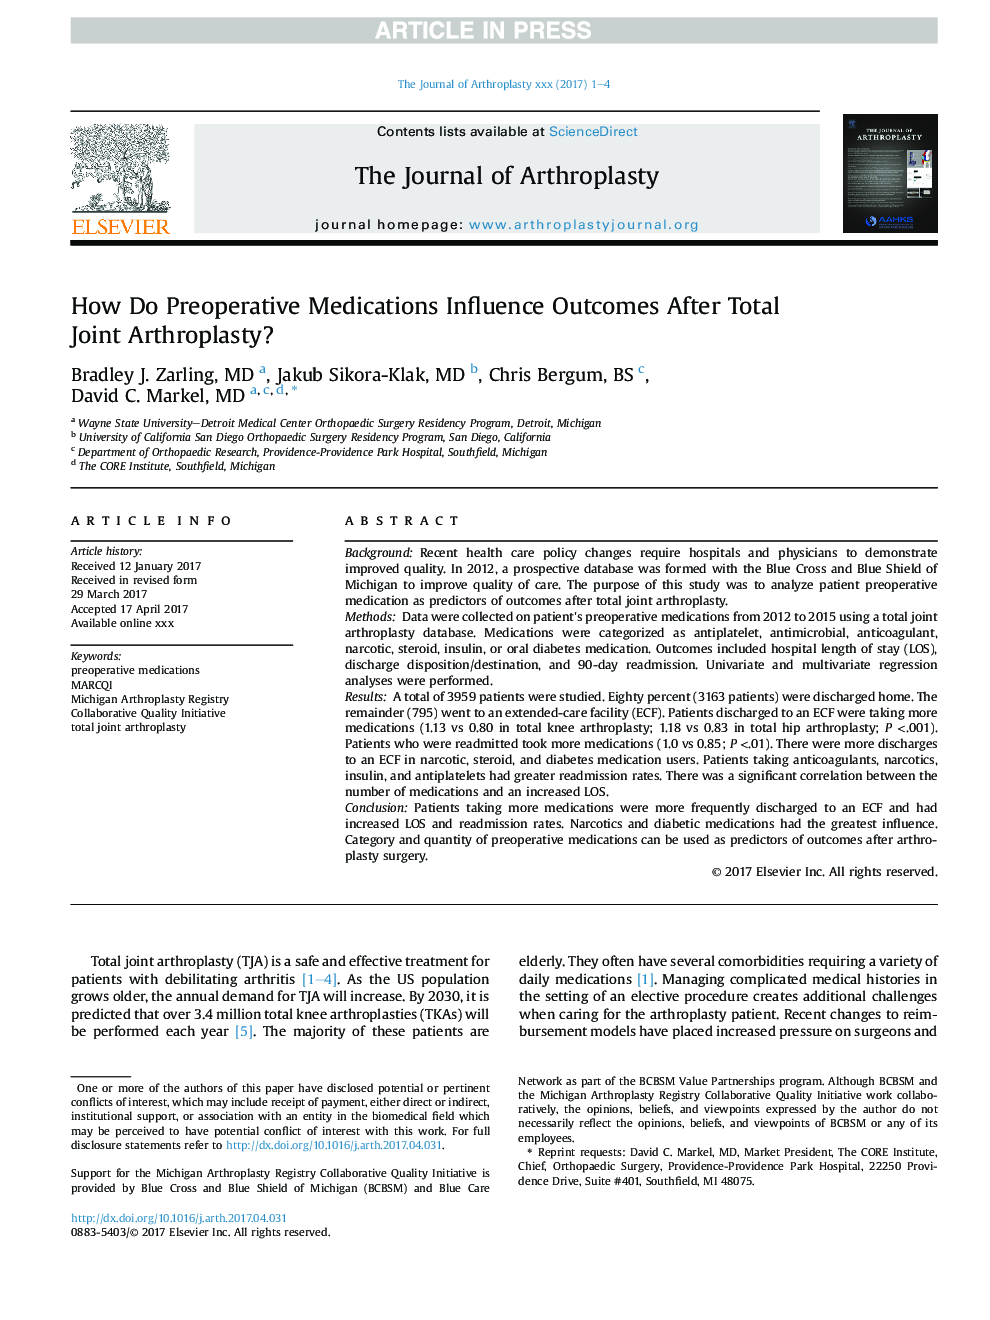 How Do Preoperative Medications Influence Outcomes After Total Joint Arthroplasty?